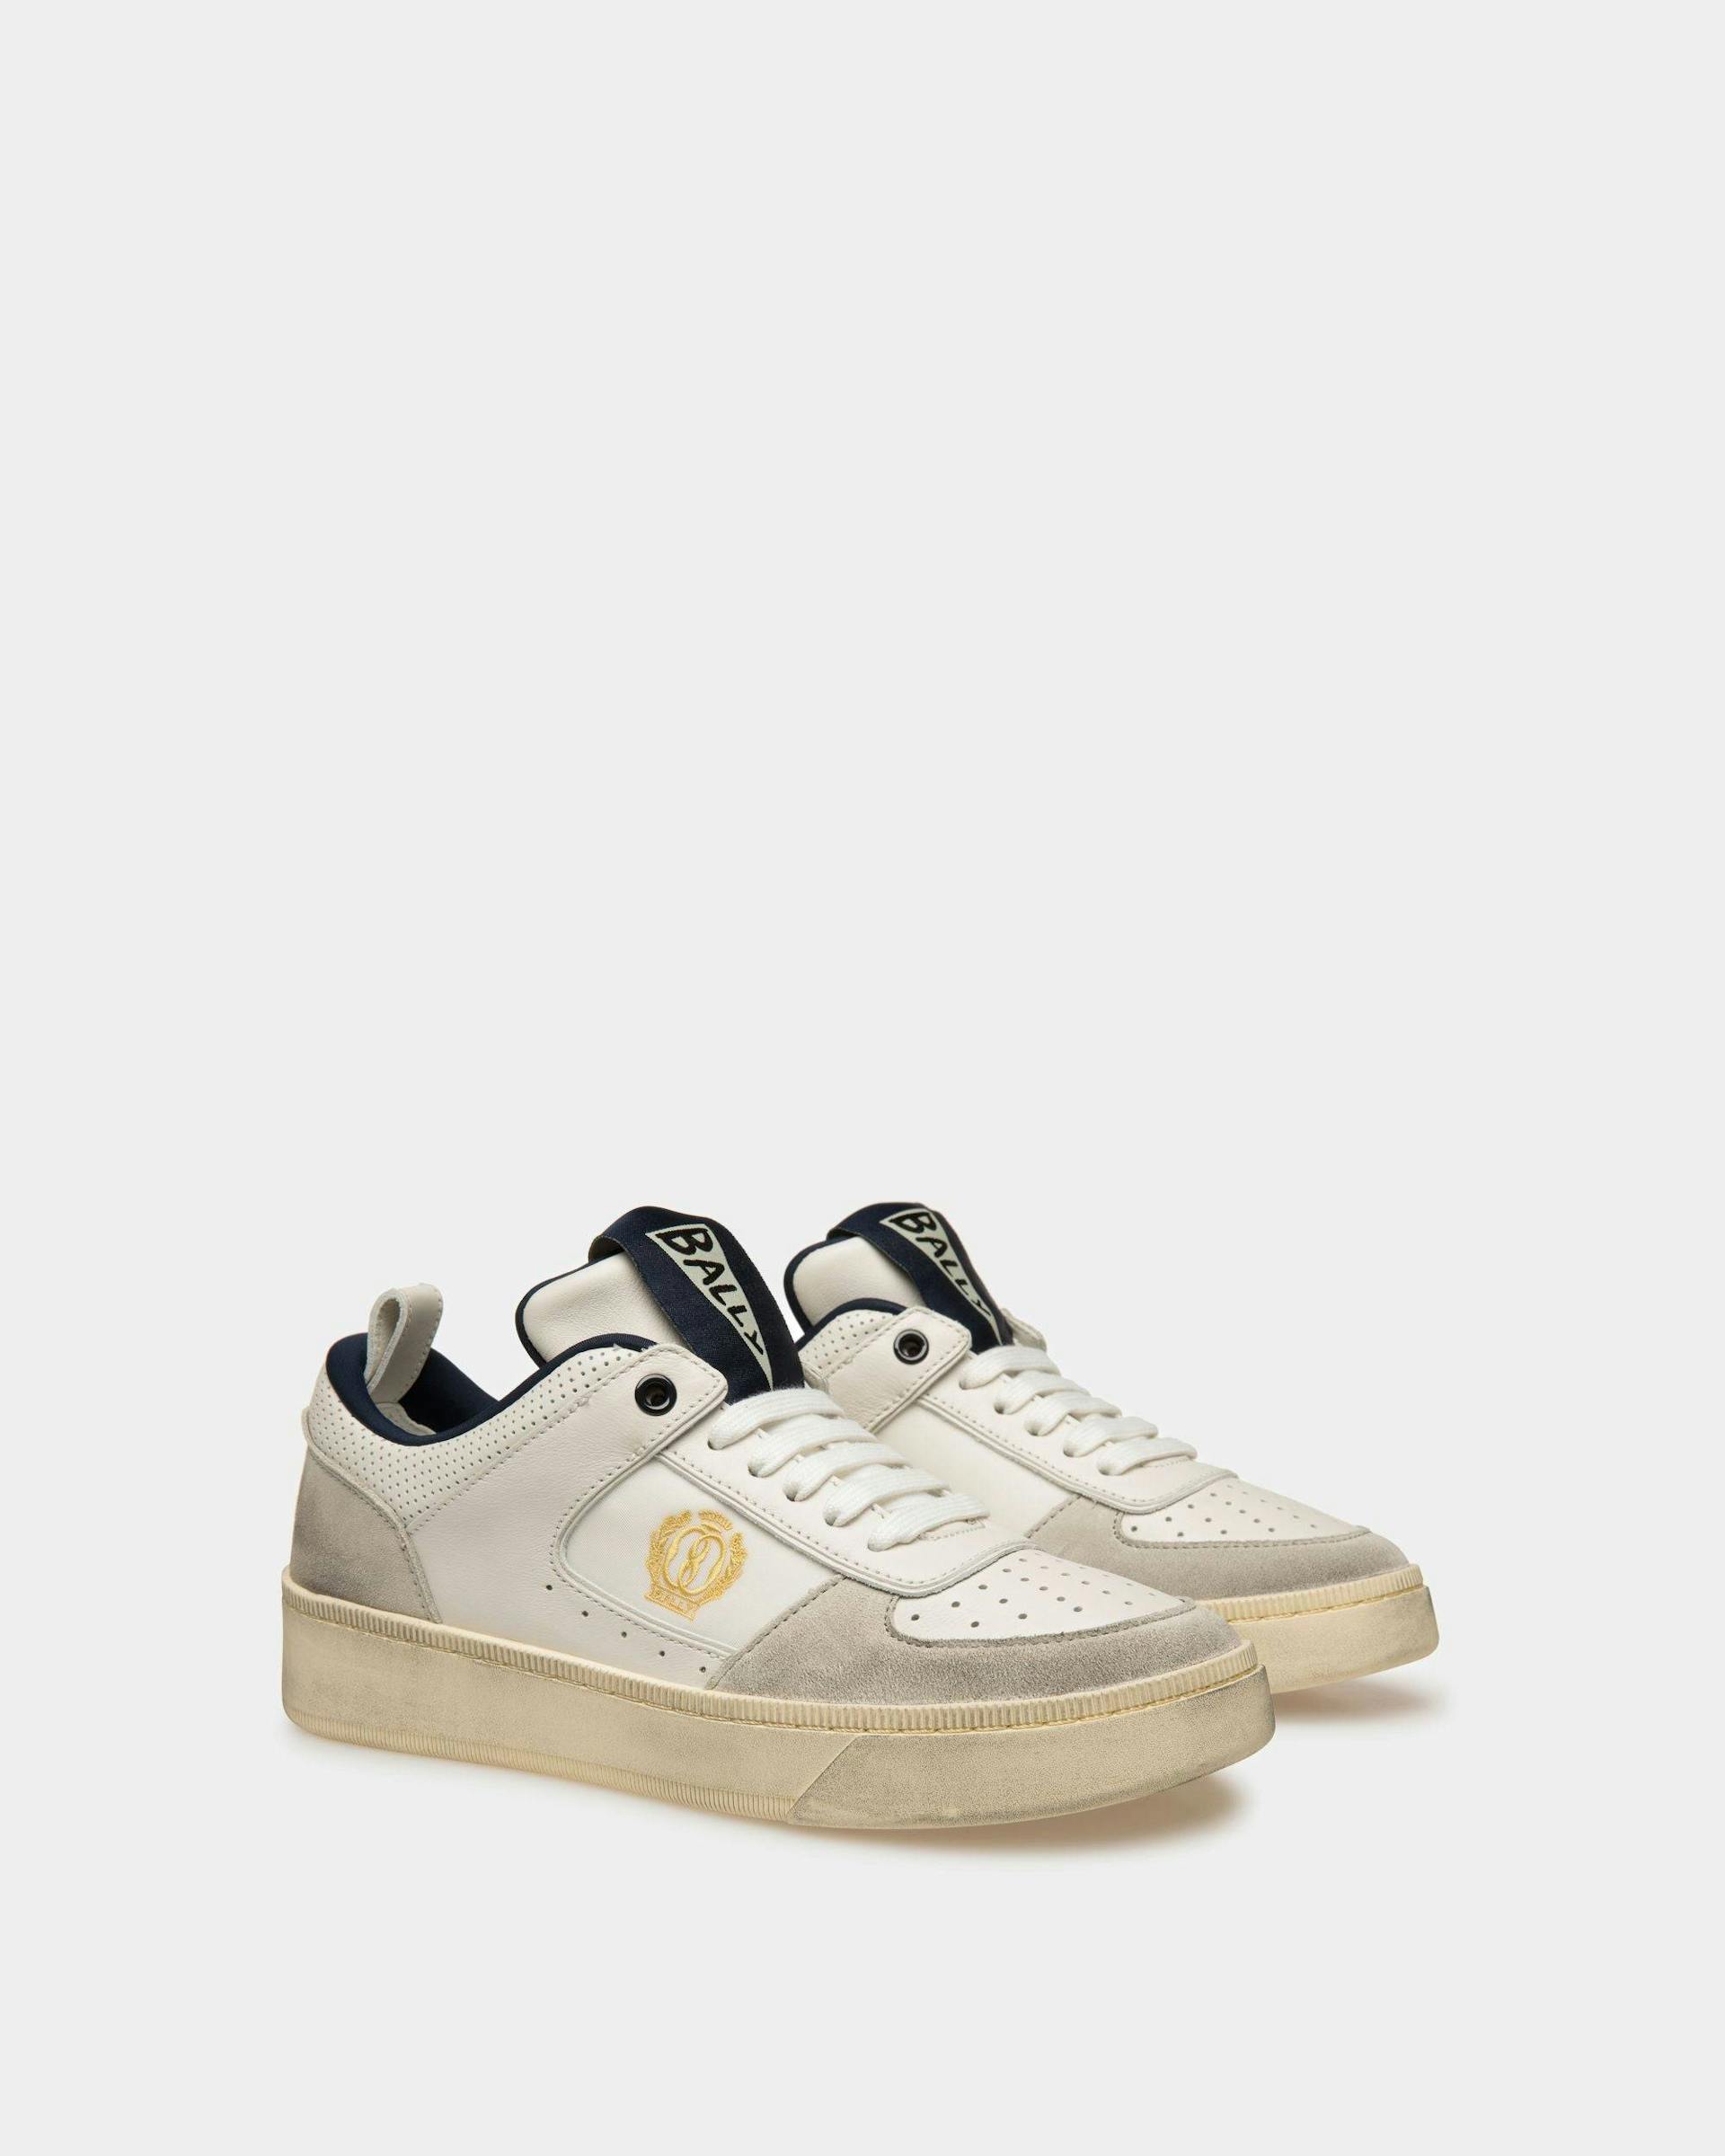 Women's Raise Sneakers In Dusty White And Midnight Leather | Bally | Still Life 3/4 Front